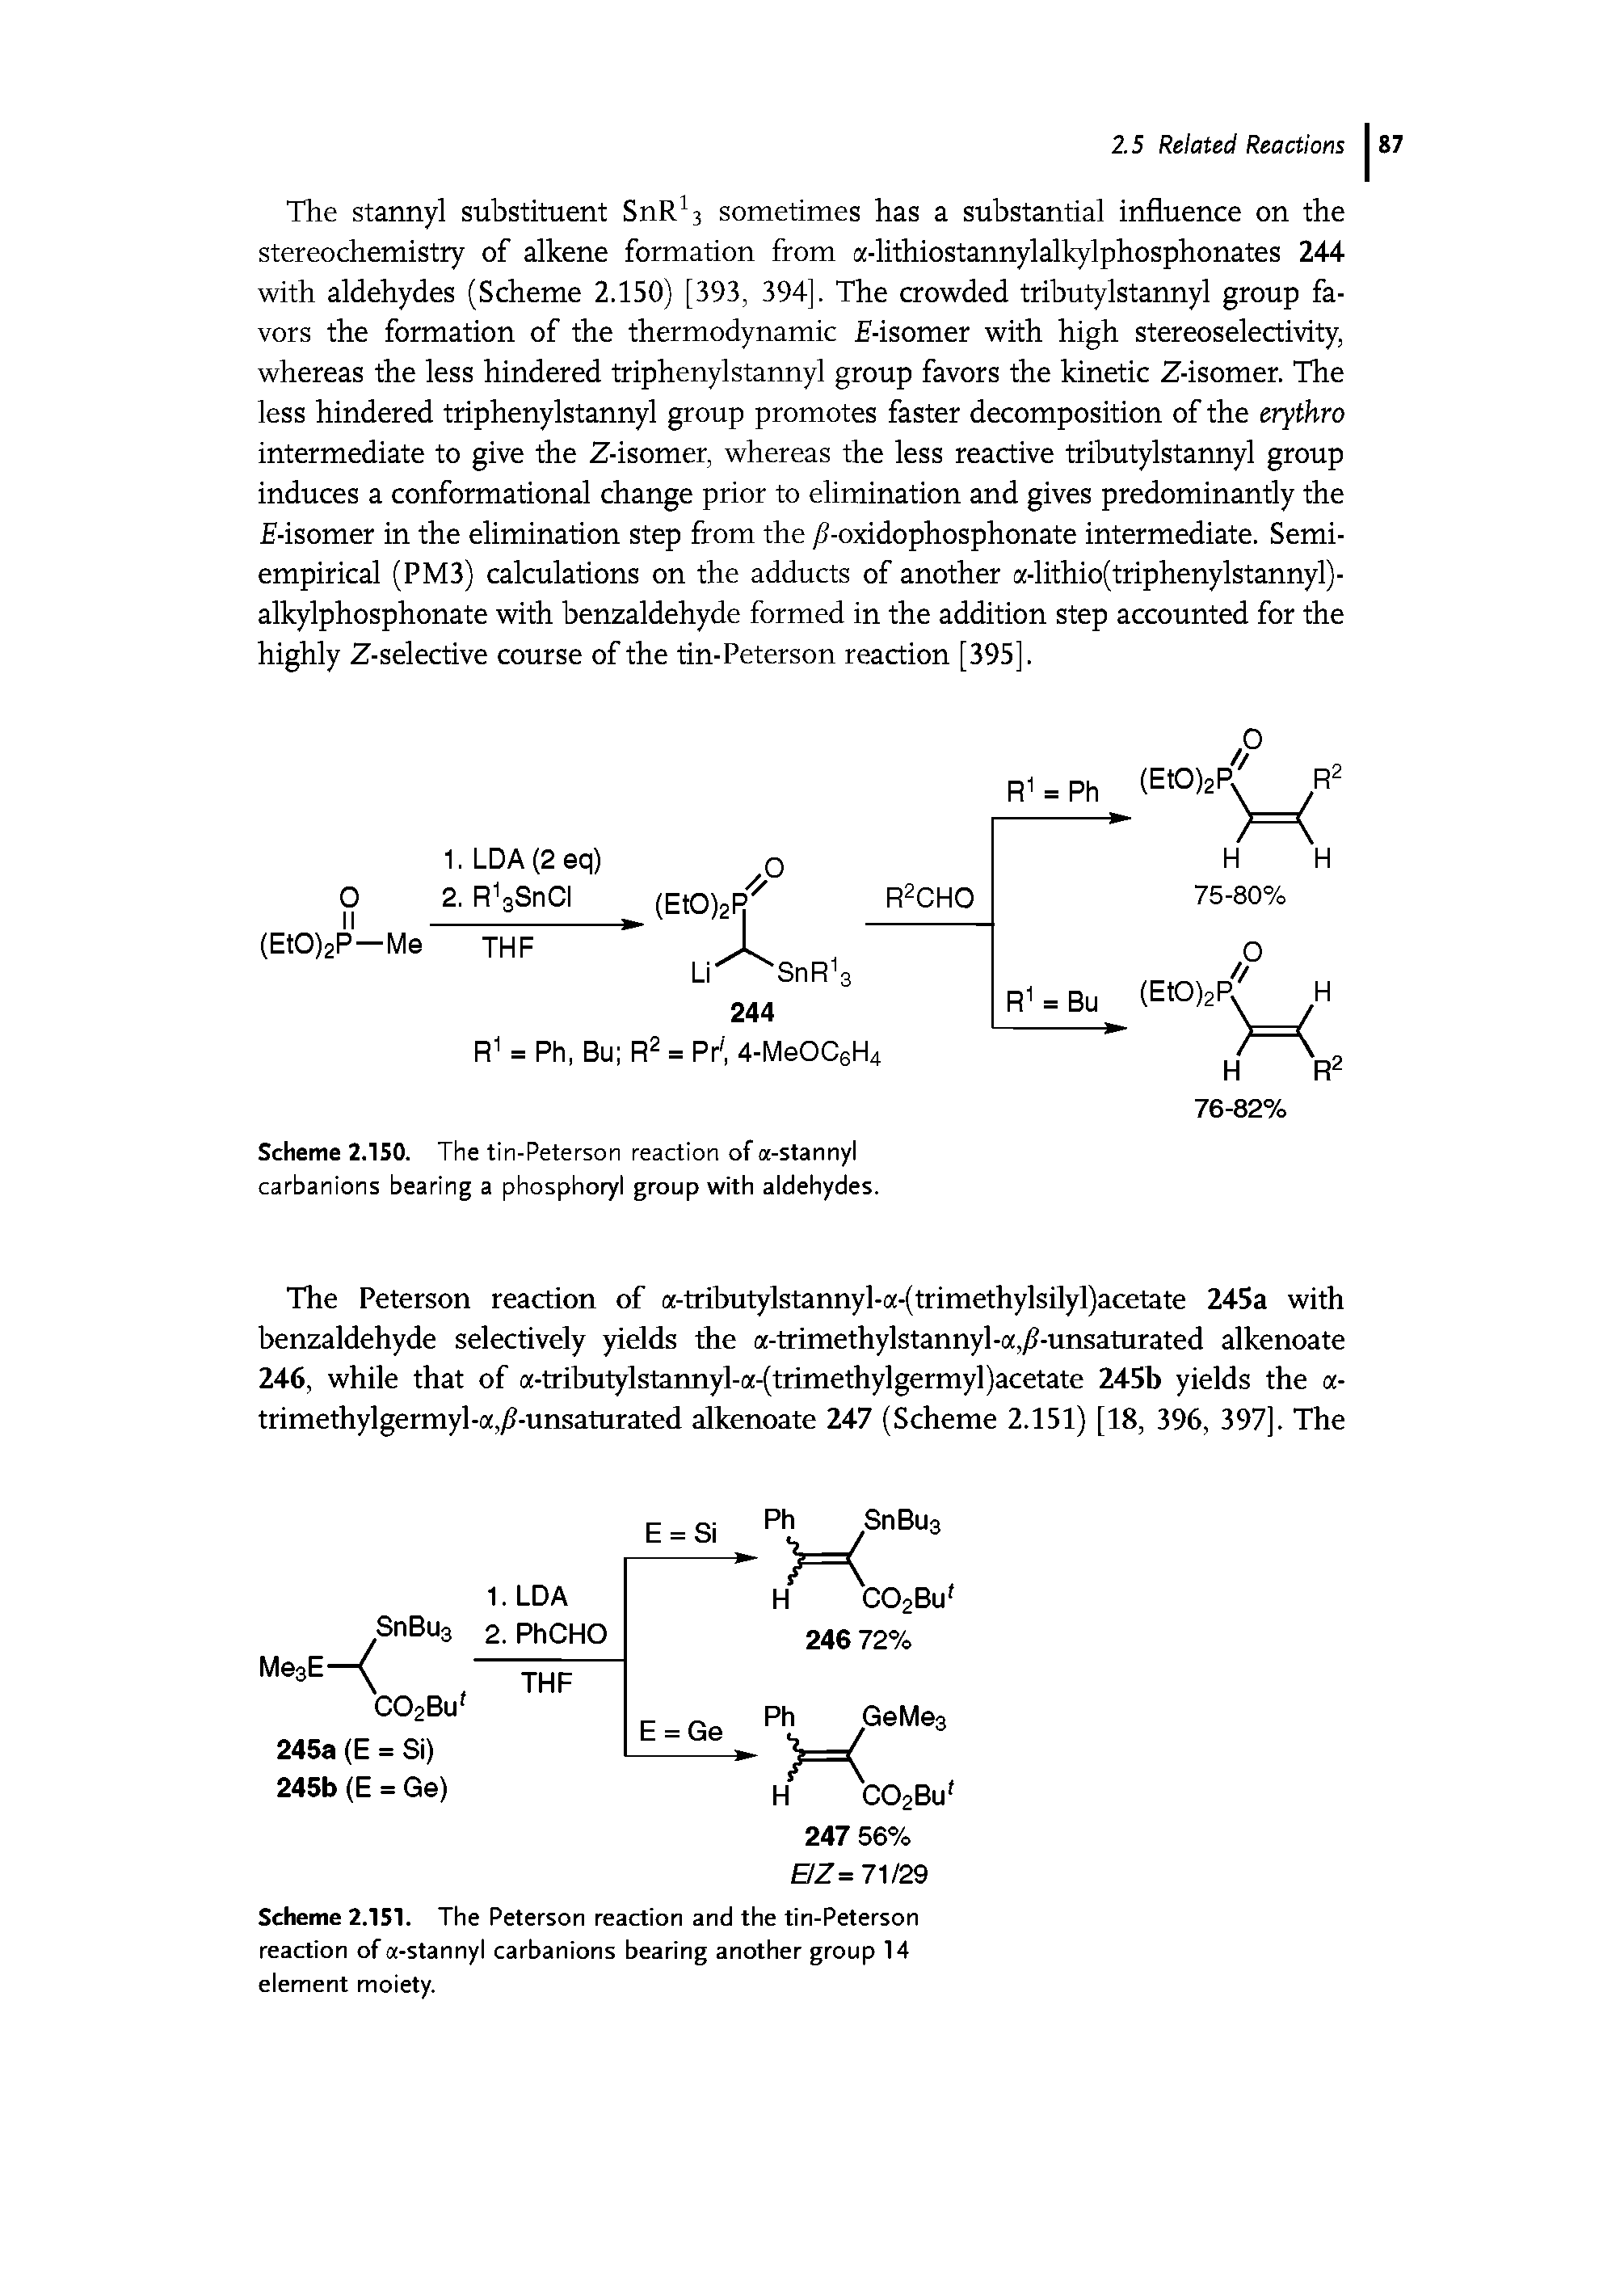 Scheme 2.151. The Peterson reaction and the tin-Peterson reaction of a-stannyl carbanions bearing another group 14 element moiety.